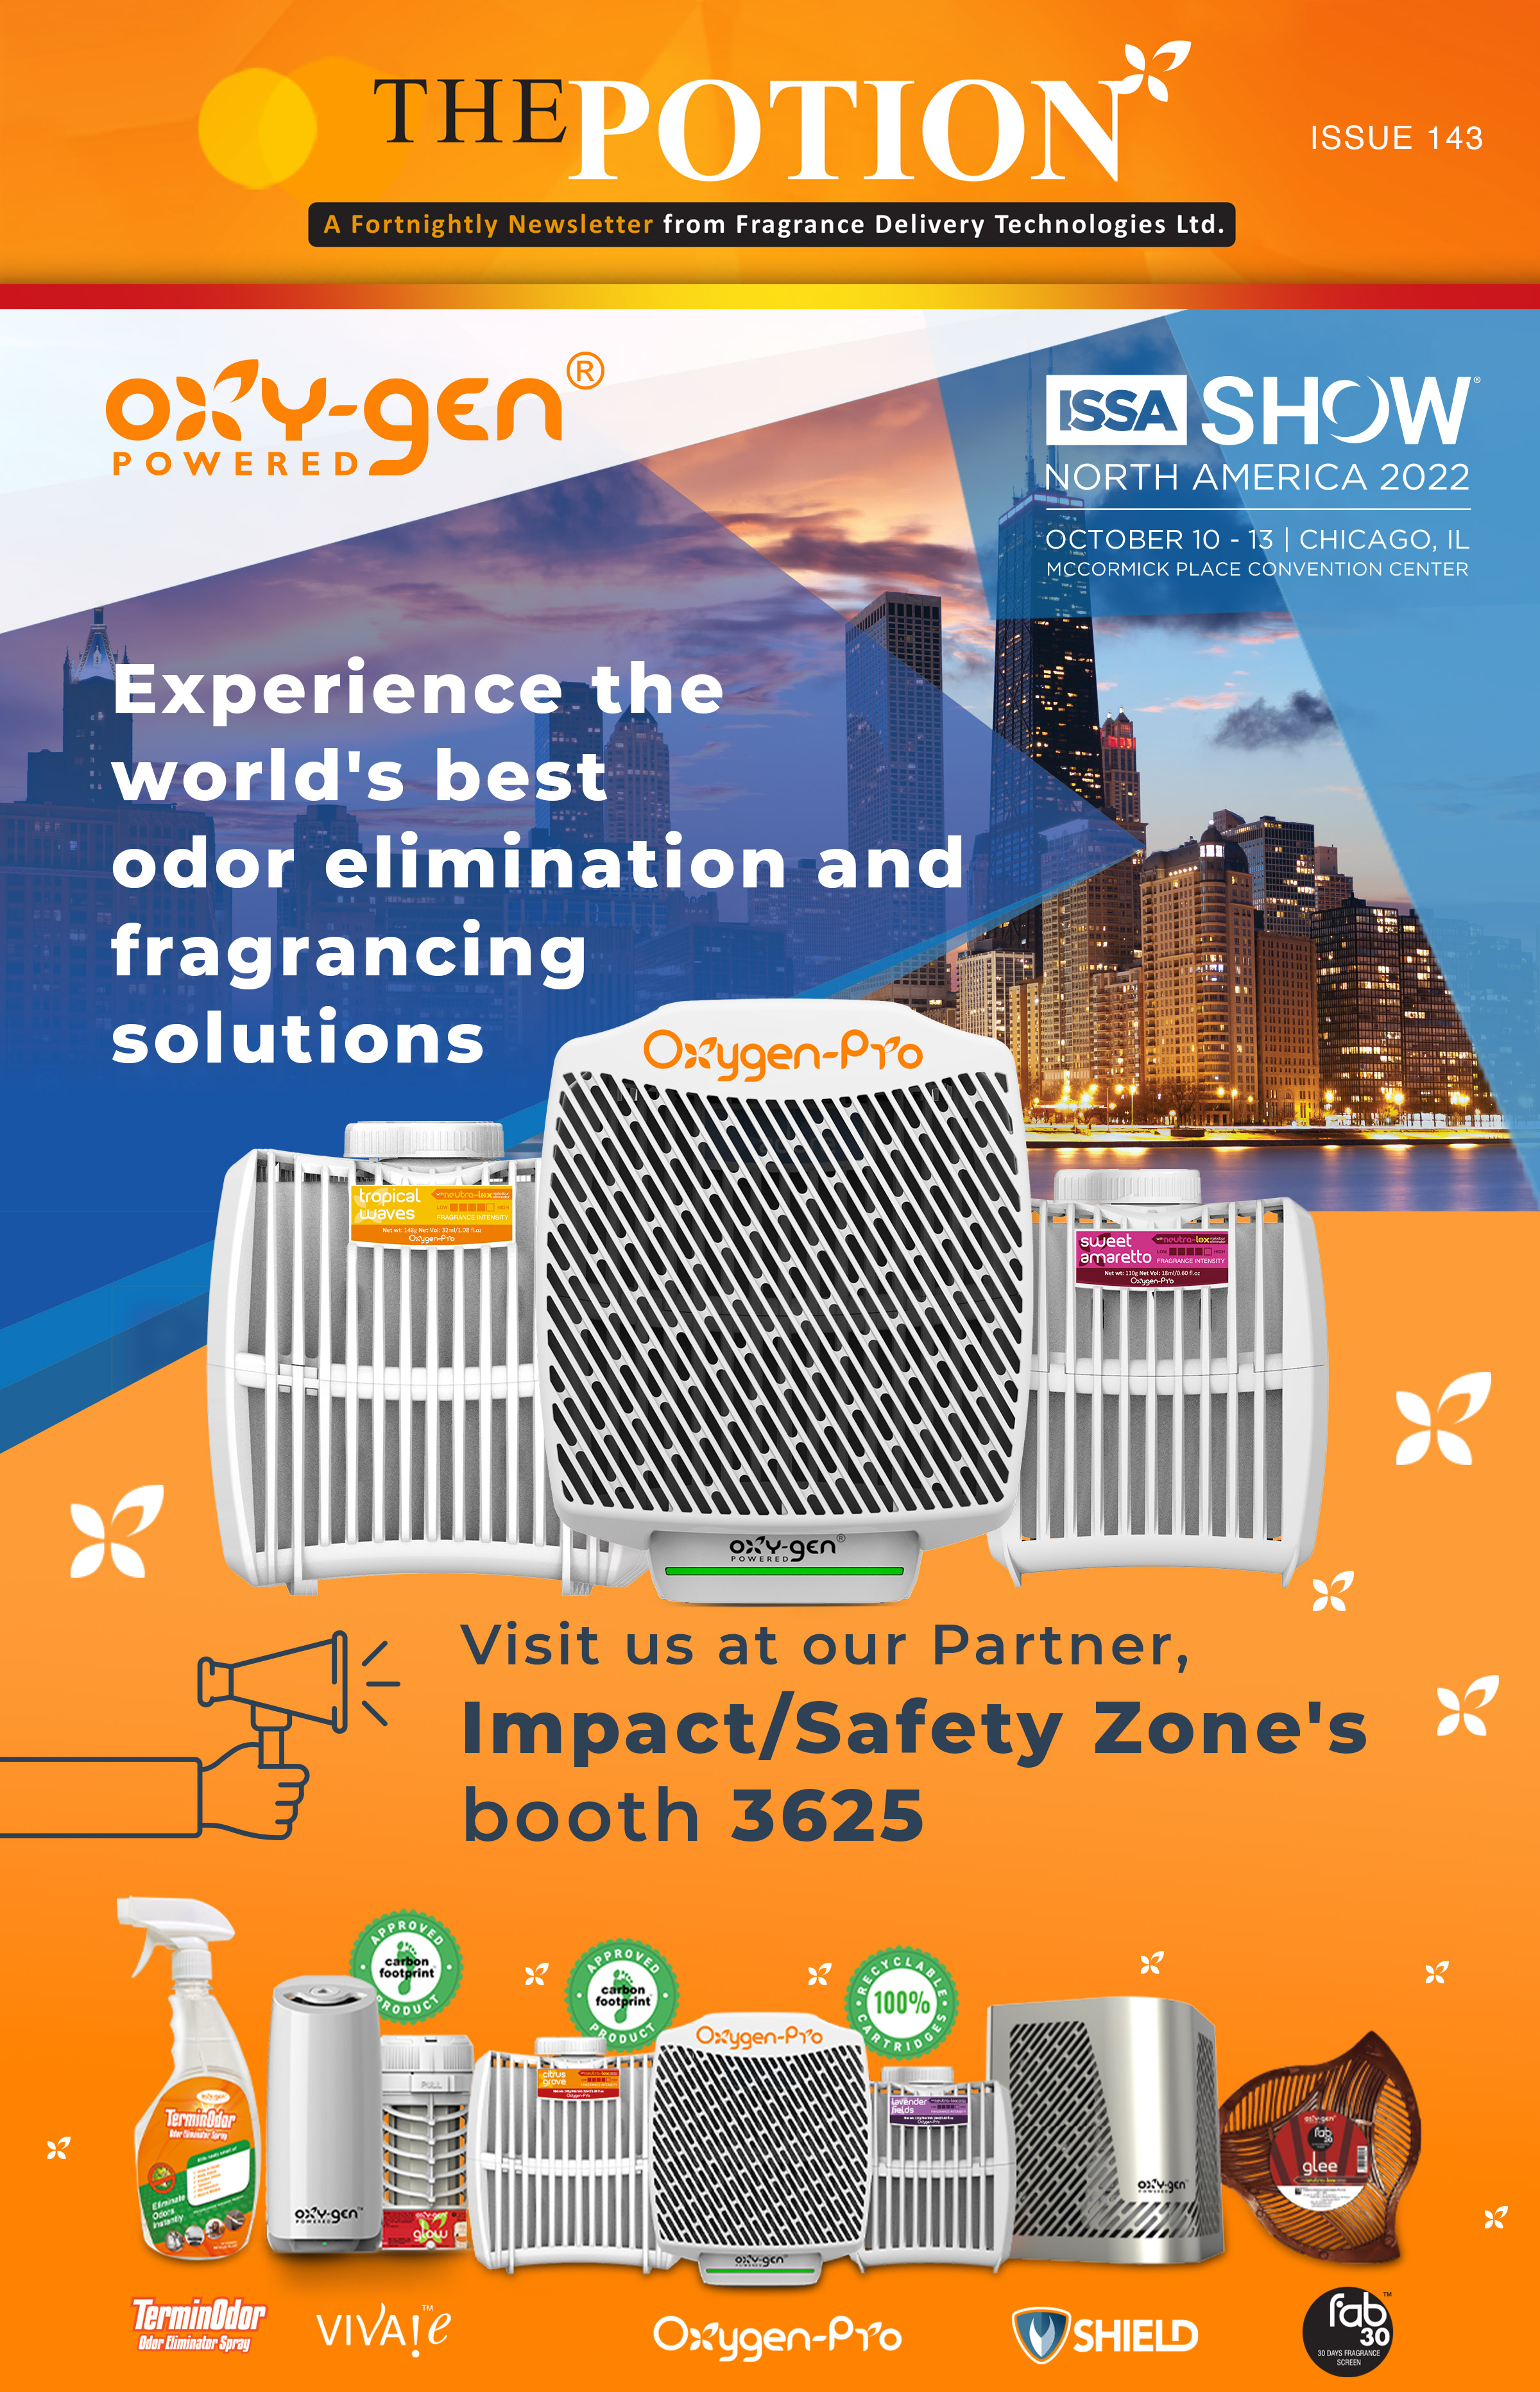 Visit us at ISSA North America - The Potion 143